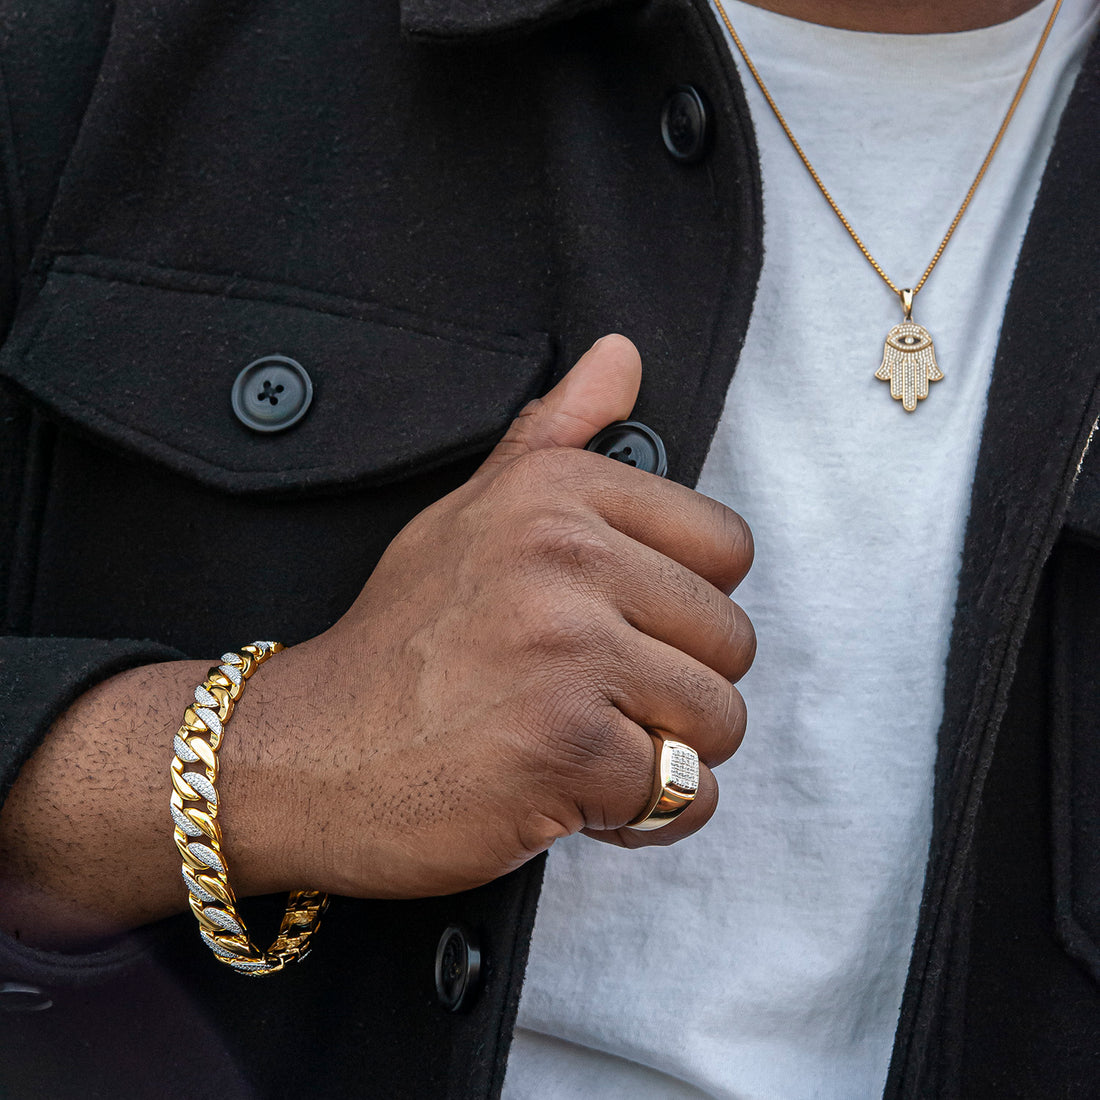 Getting Started With Men's Jewelry